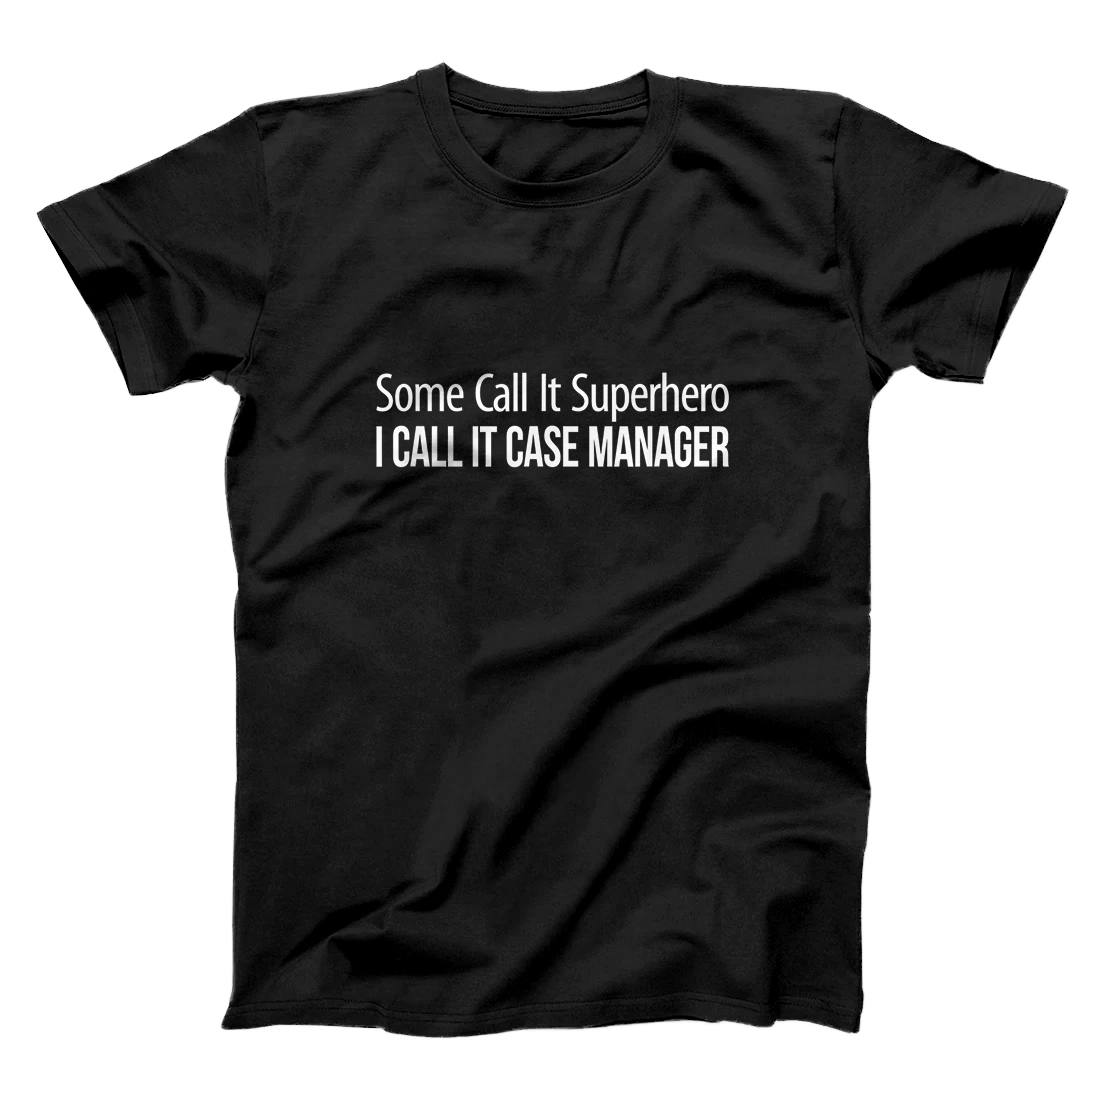 Personalized Some Call It Superhero - I Call It Case Manager - T-Shirt